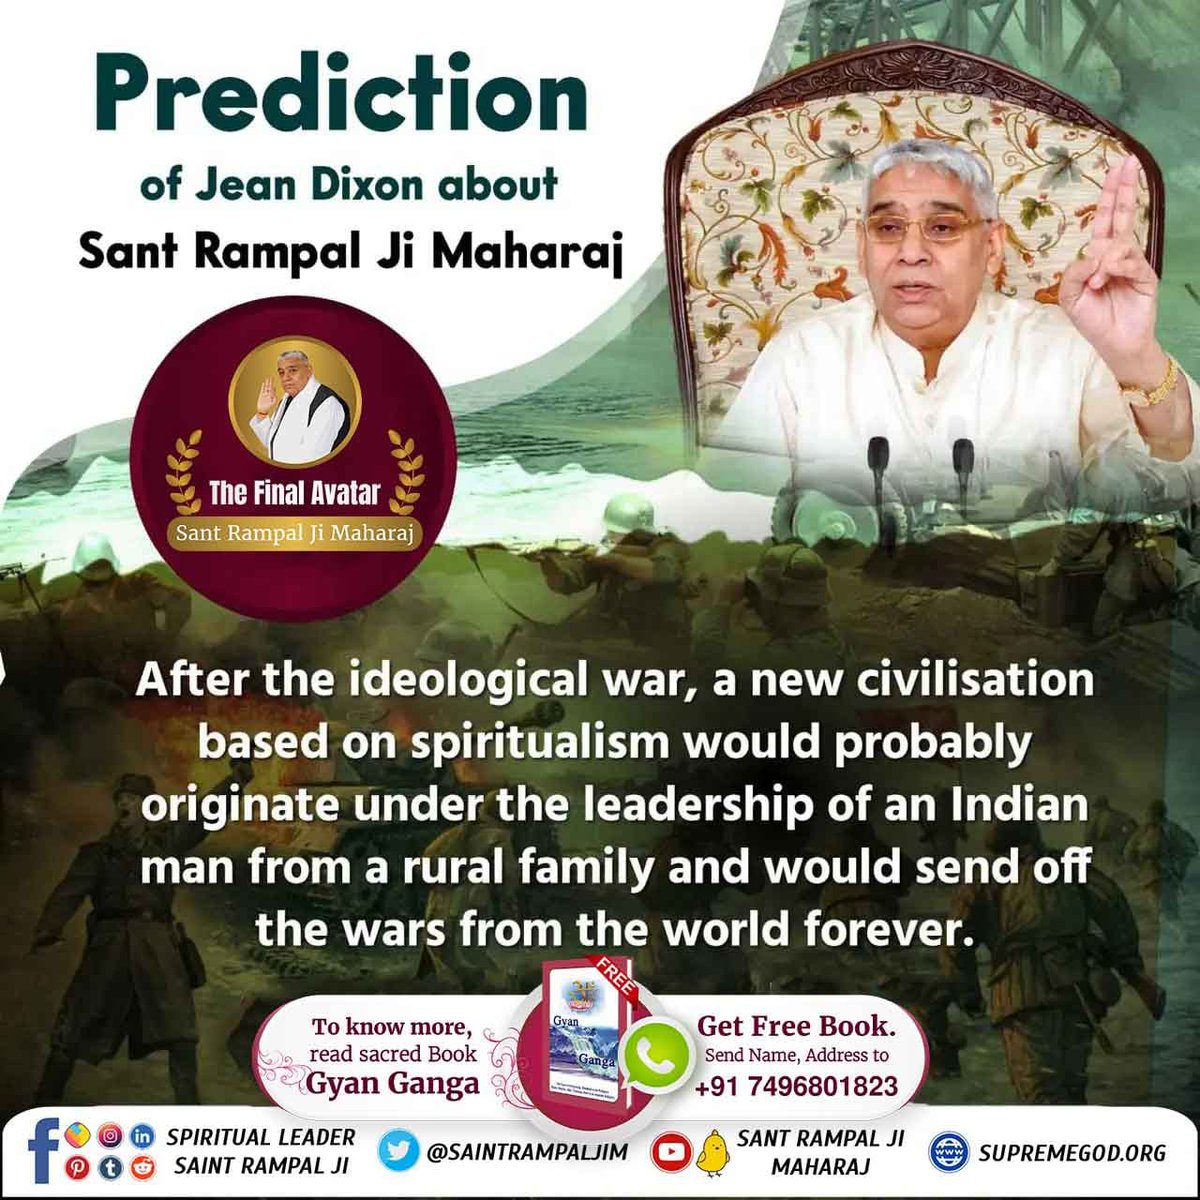 #SaviorOfTheWorldSantRampalJi A world-renowned leader at the end of 20th century and at the beginning of 21st century, taking birth in an eastern country will tie the whole world with the bond of unity through brotherhood and courtesy.